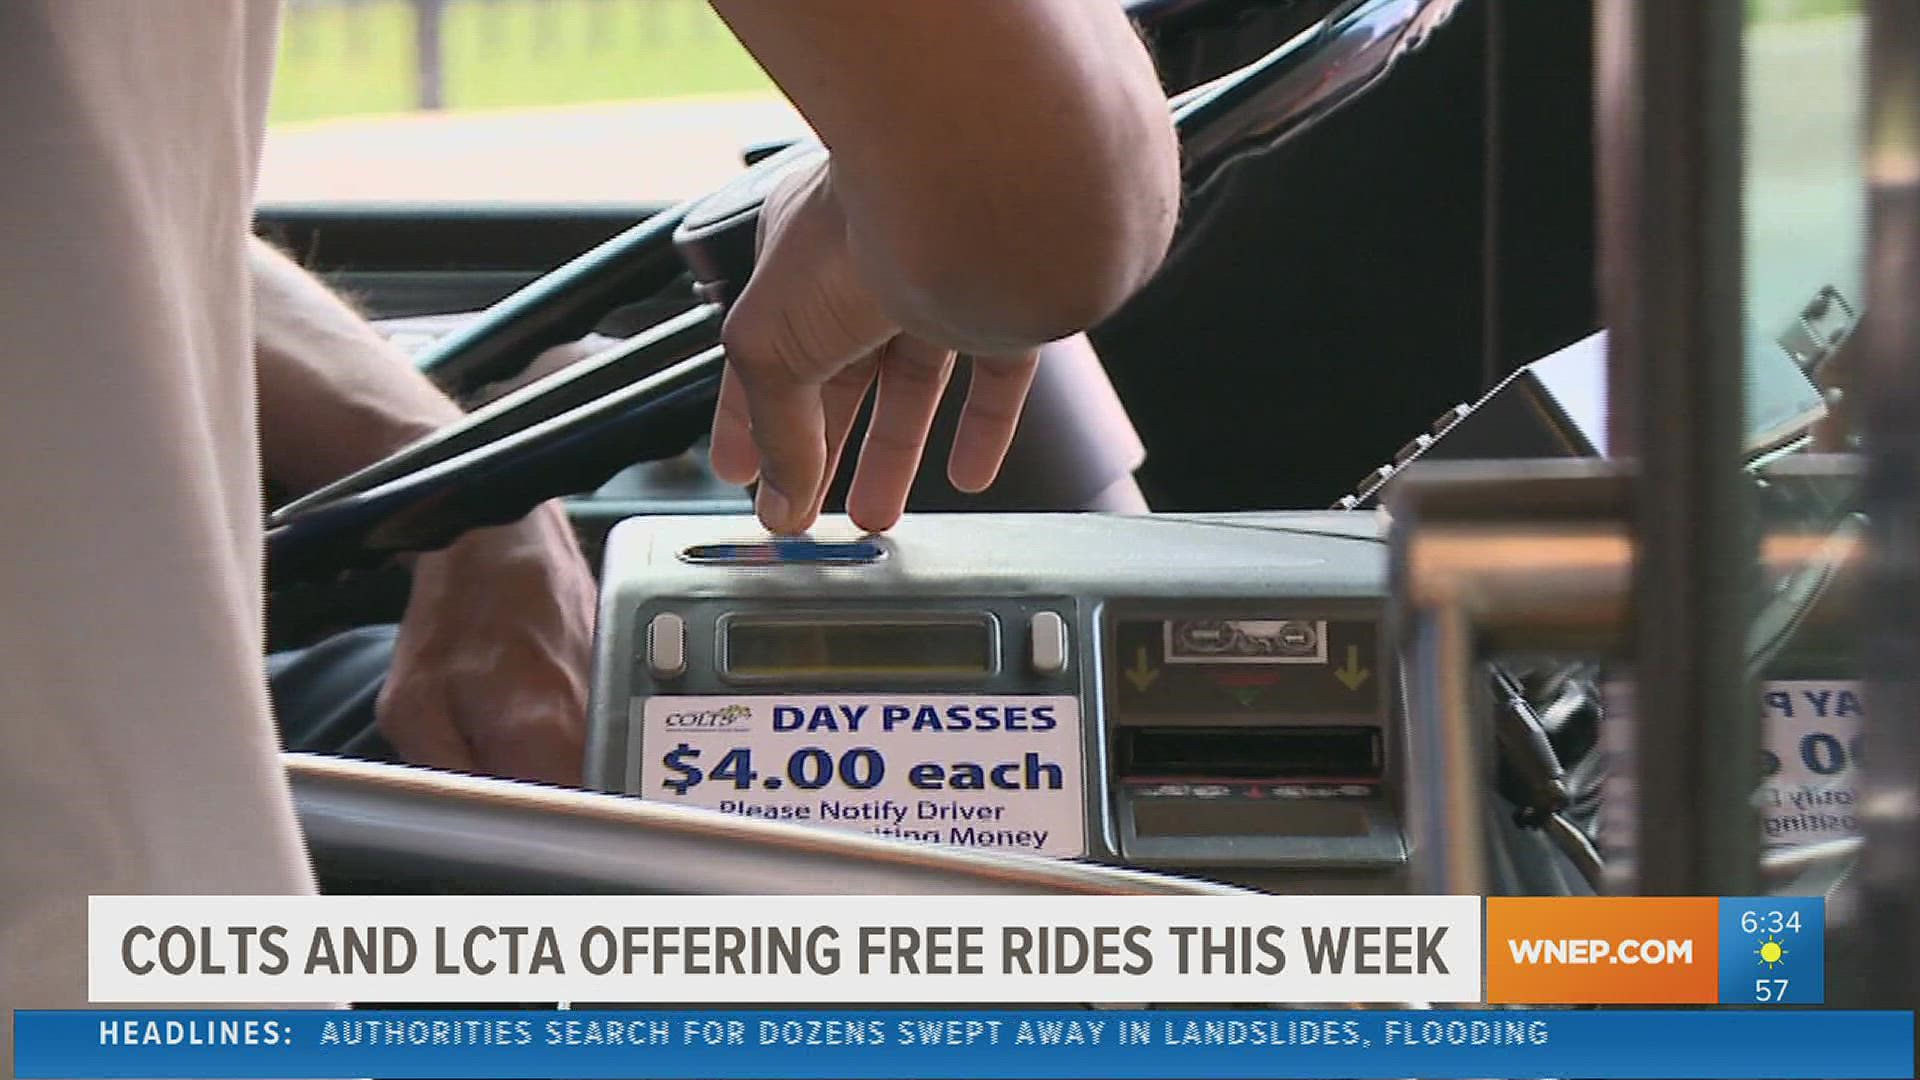 There's a push to get more people to ditch their keys, and get on the bus. You can get a free ride this week in Luzerne and Lackawanna Counties.